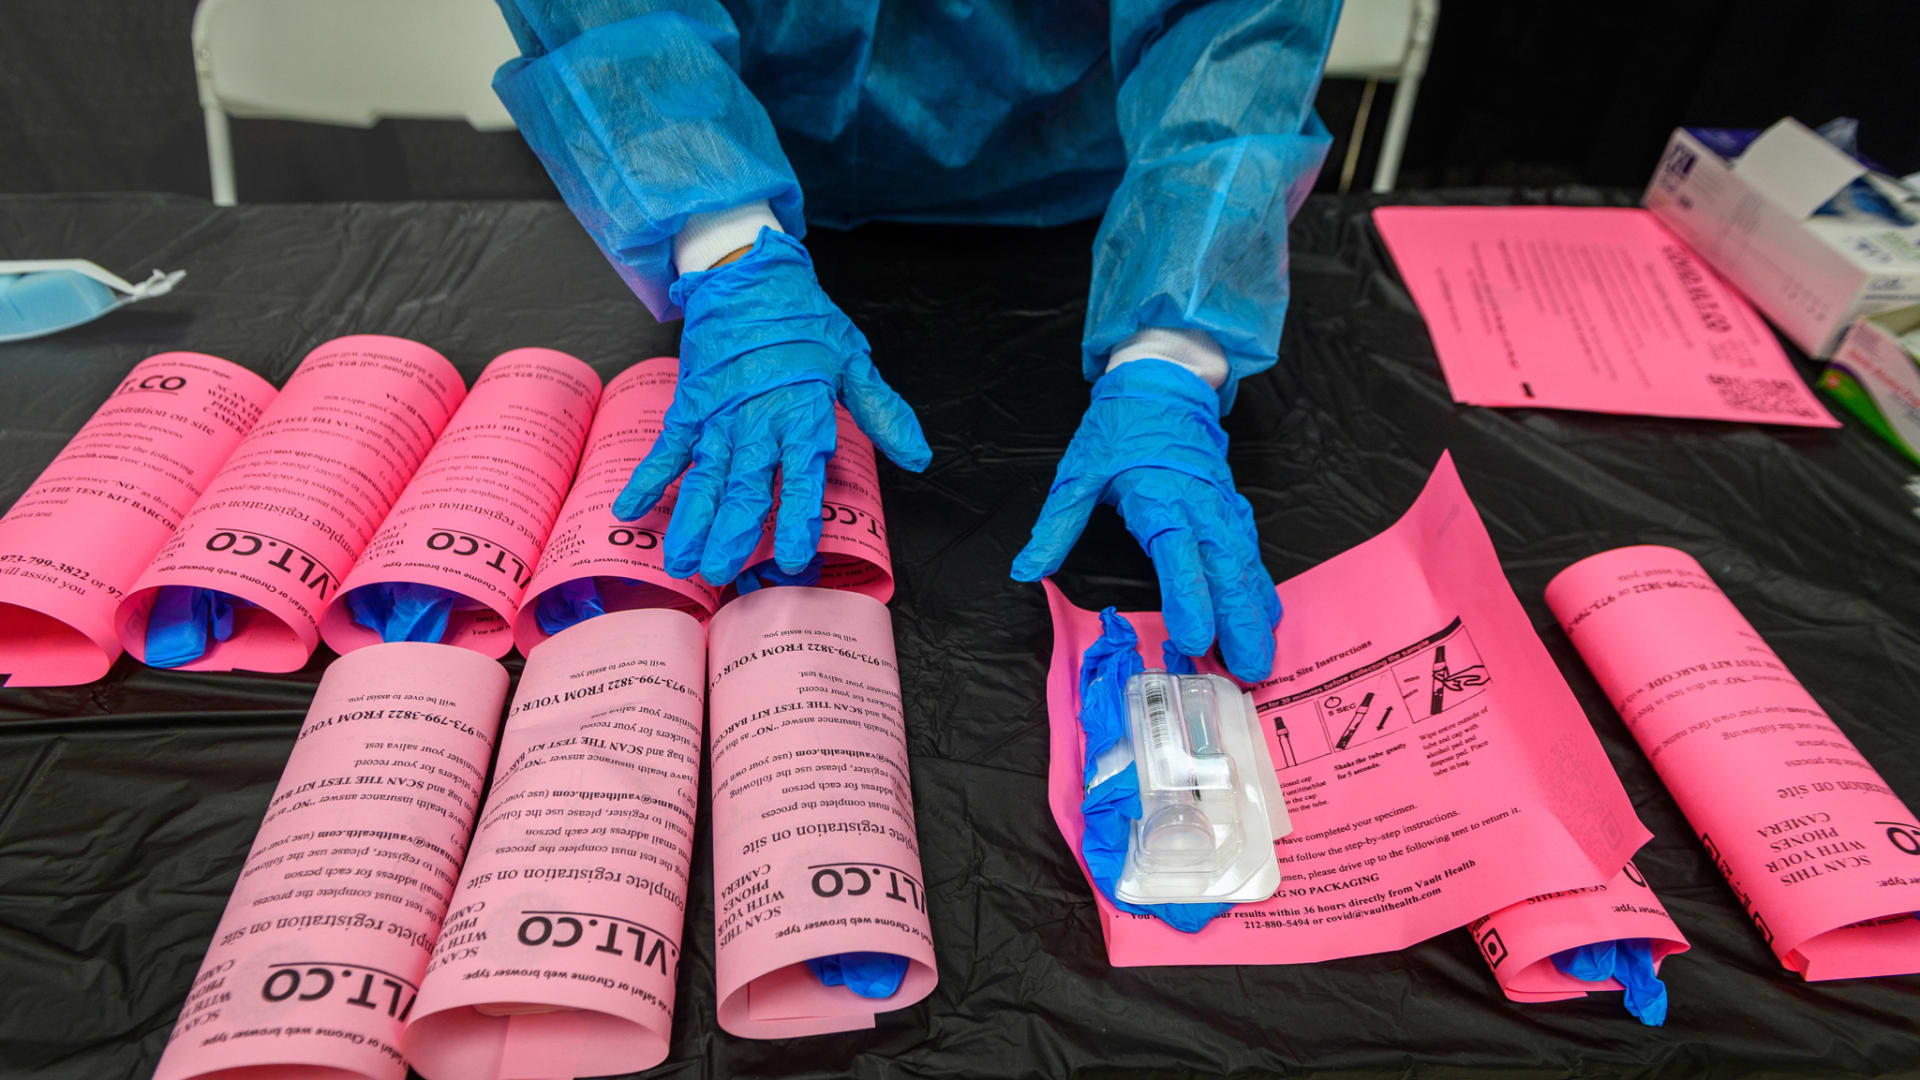 A health care worker arranges Covid-19 testing kits at an Essex County site in West Orange, New Jersey.